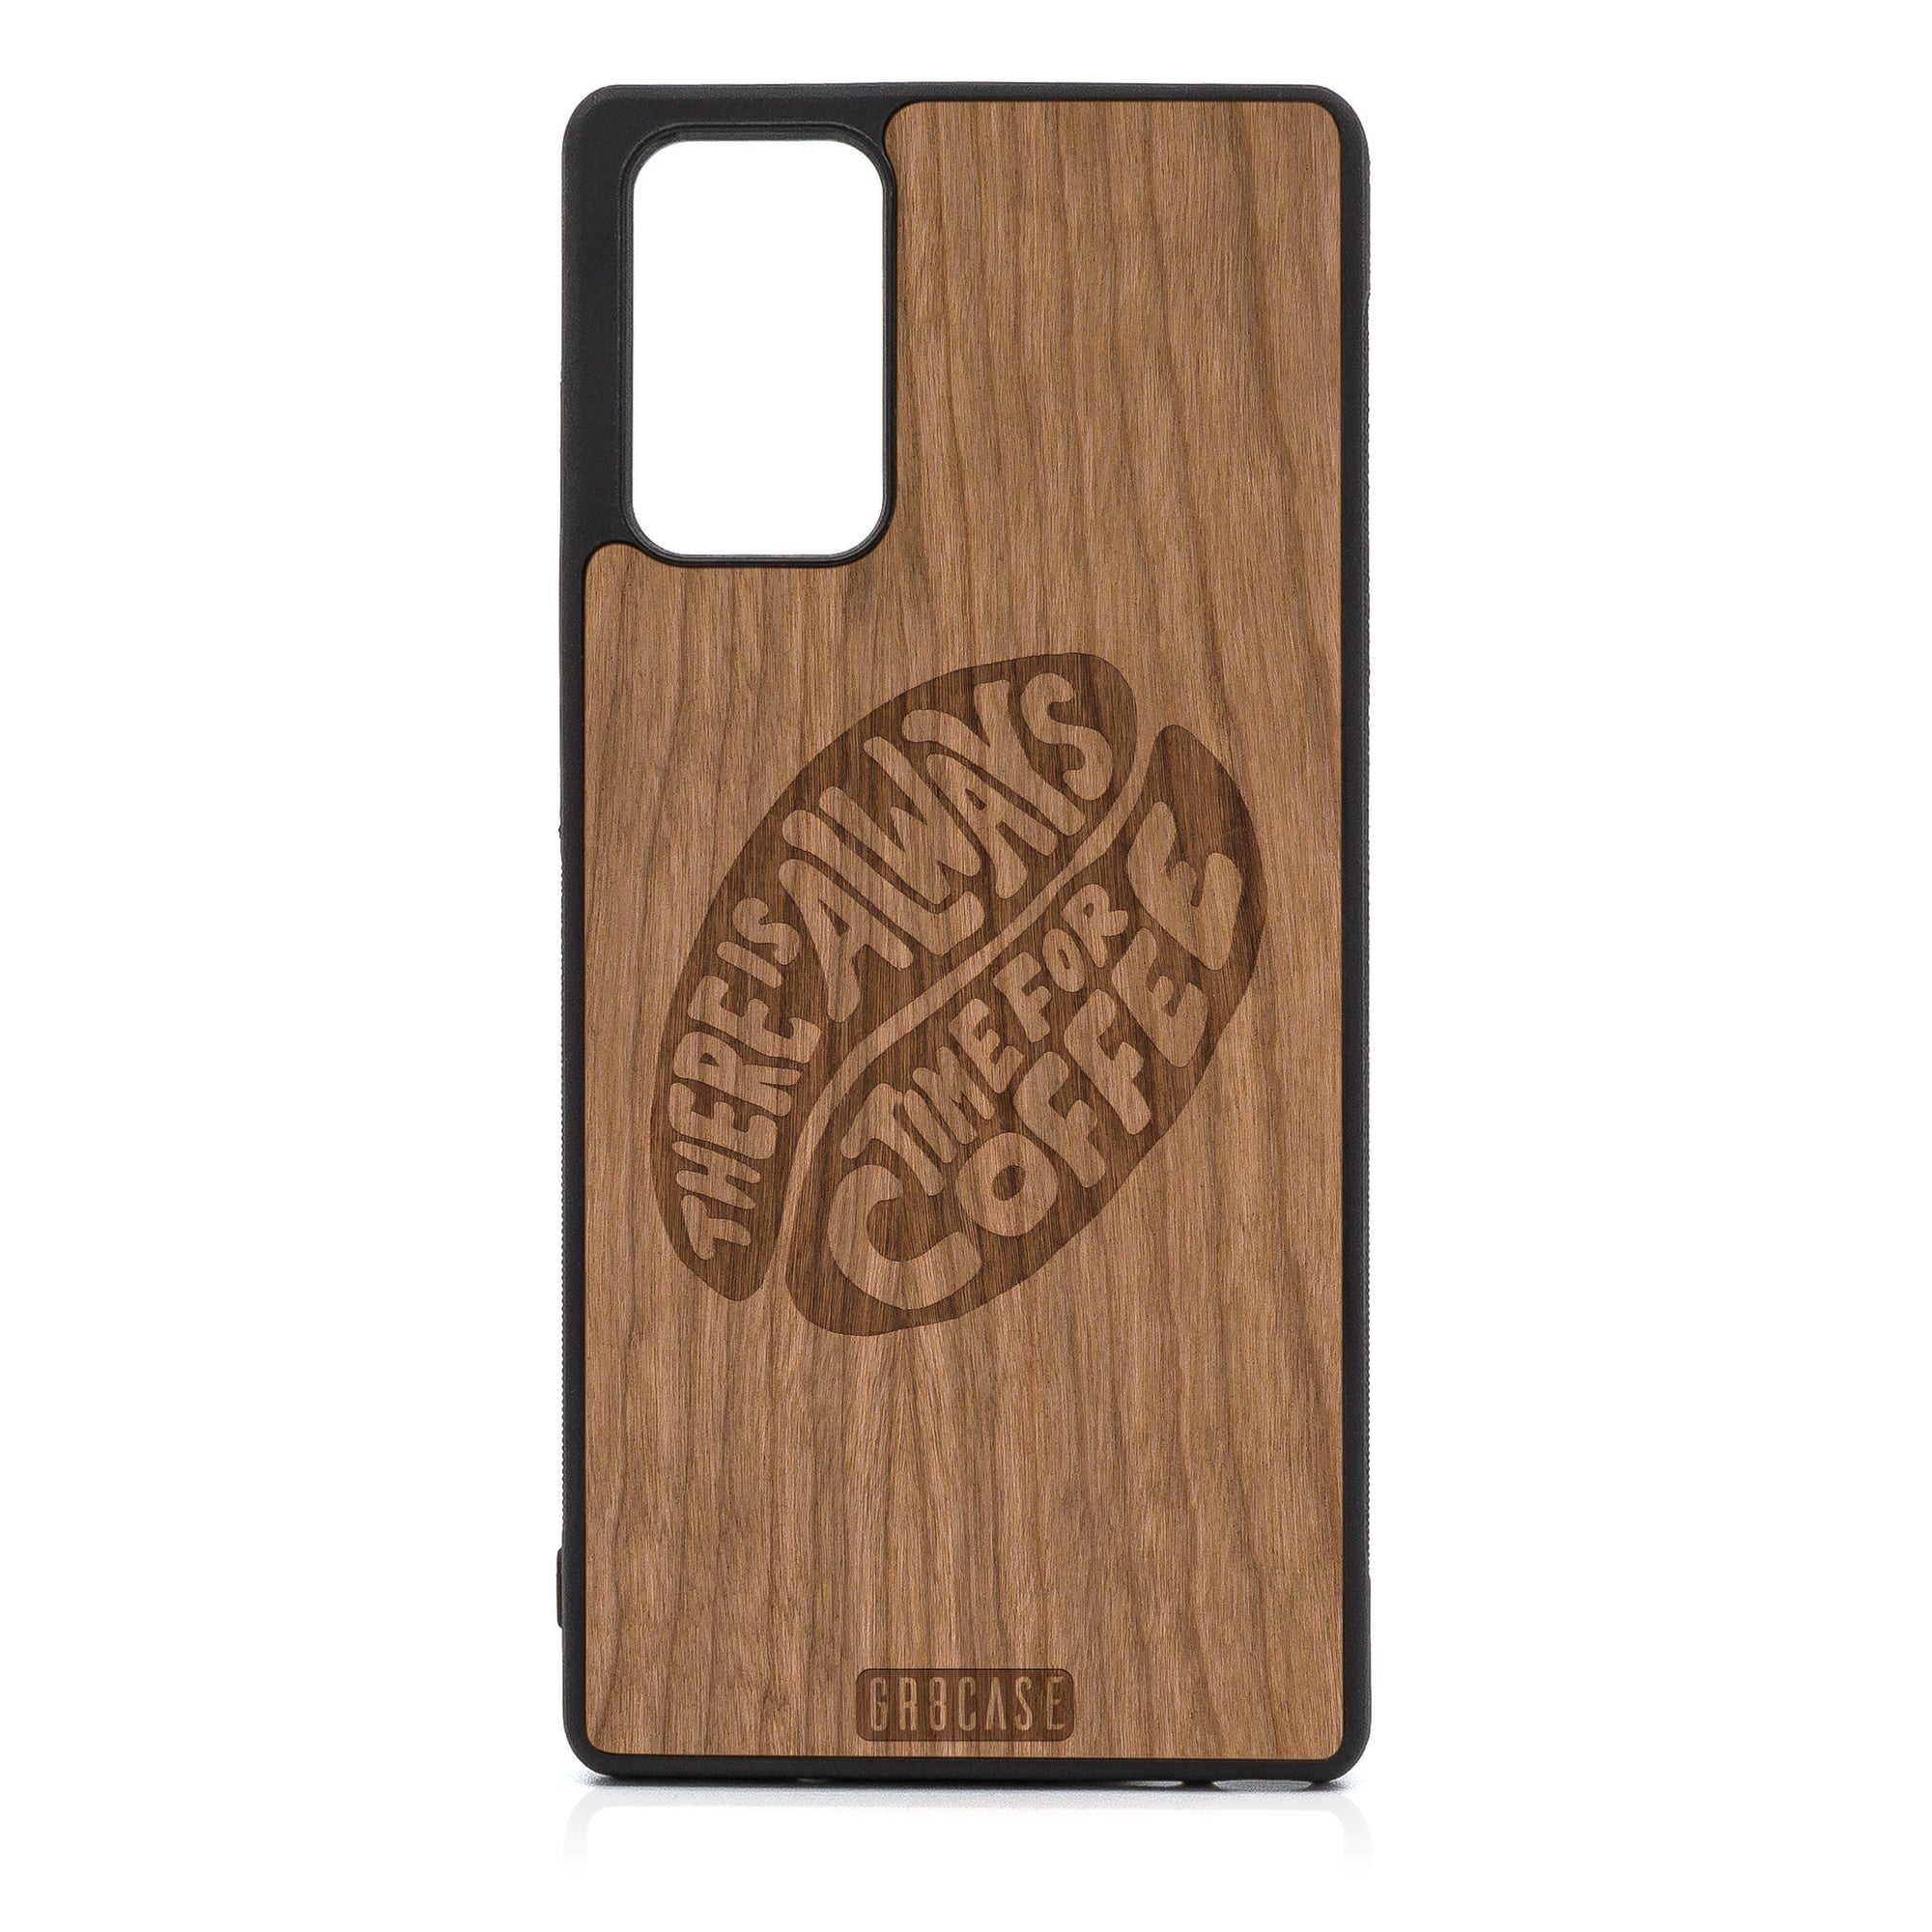 There Is Always Time For Coffee Design Wood Case For Samsung Galaxy Note 20